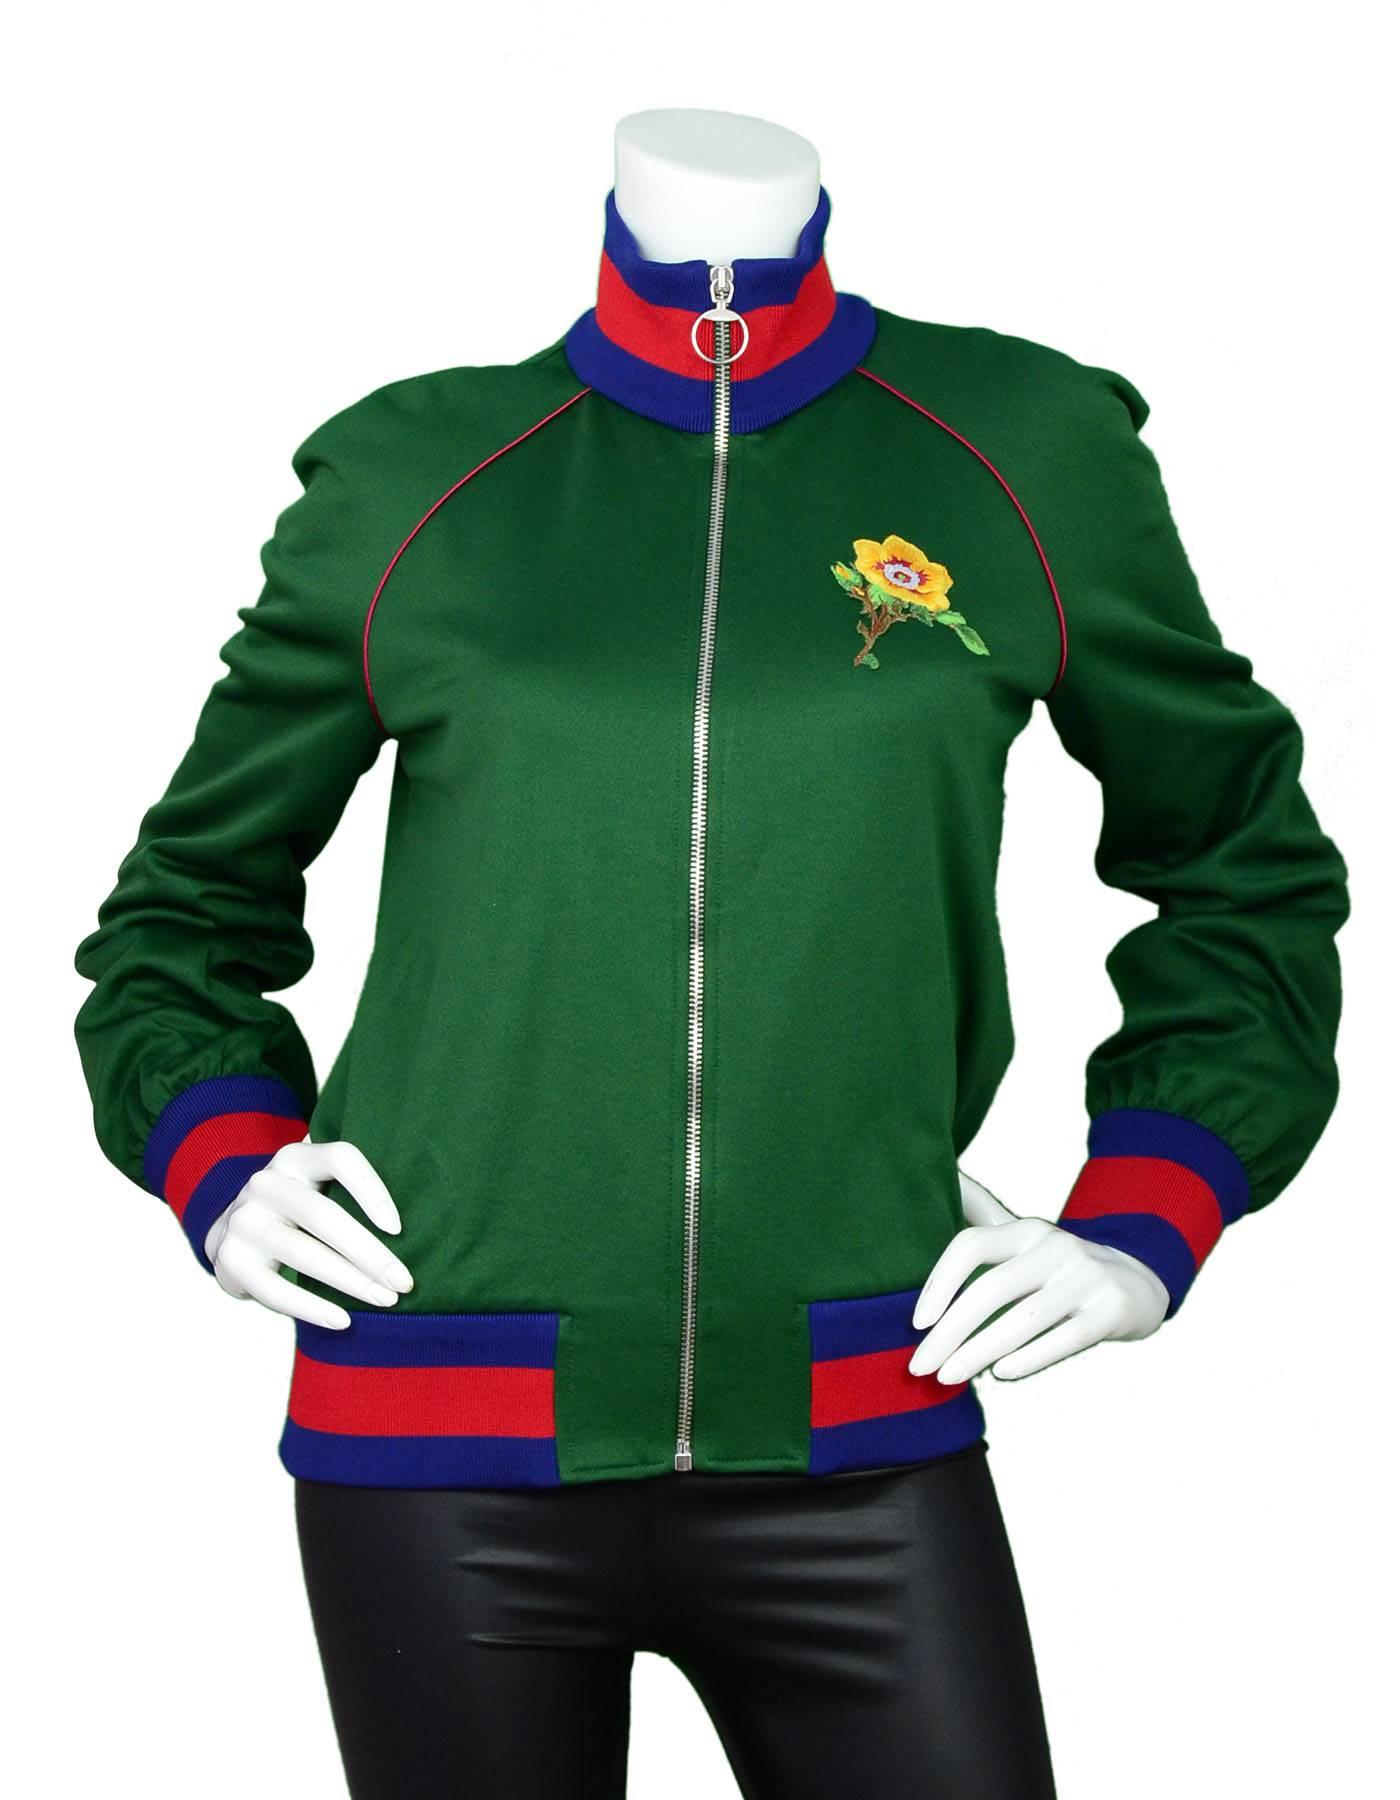 Gucci '18 Green Blind For Love Applique Satin-Jersey Bomber Jacket Sz L NWT
Features tiger and french 'blind for love' applique at back

Made In: Italy
Color: Green, red, navy
Composition: 55% polyester, 45% cotton
Closure/Opening: Front zip